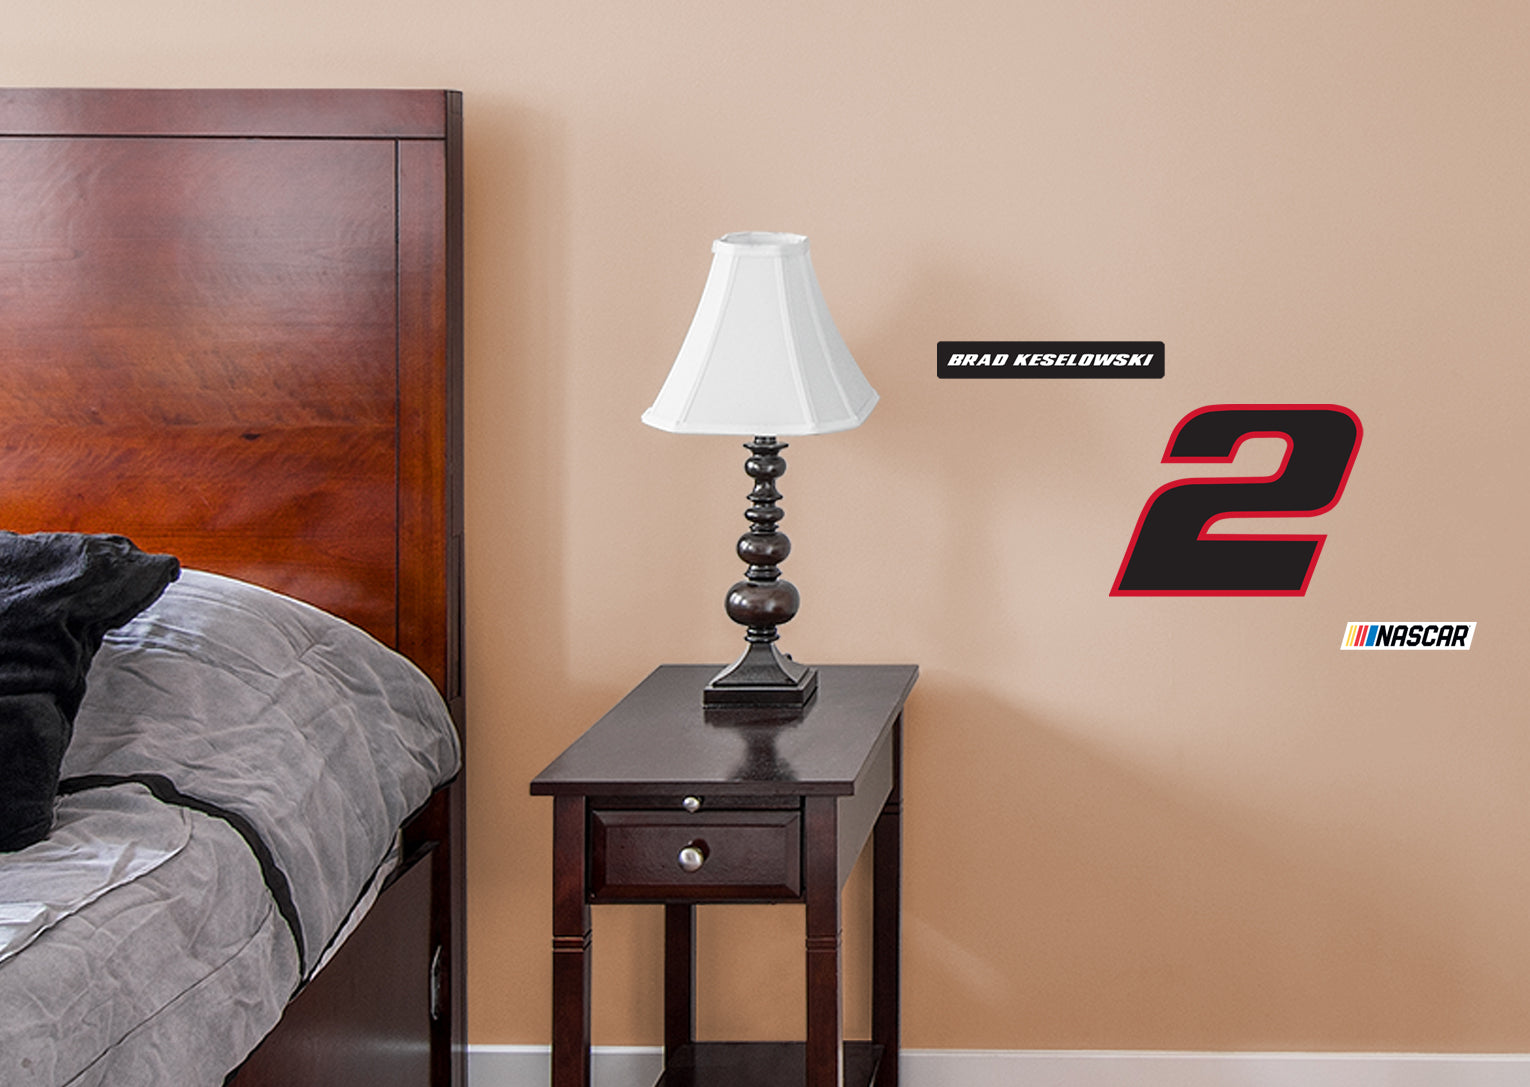 Brad Keselowski 2021 #2 Logo - Officially Licensed NASCAR Removable Wall Decal Large by Fathead | Vinyl